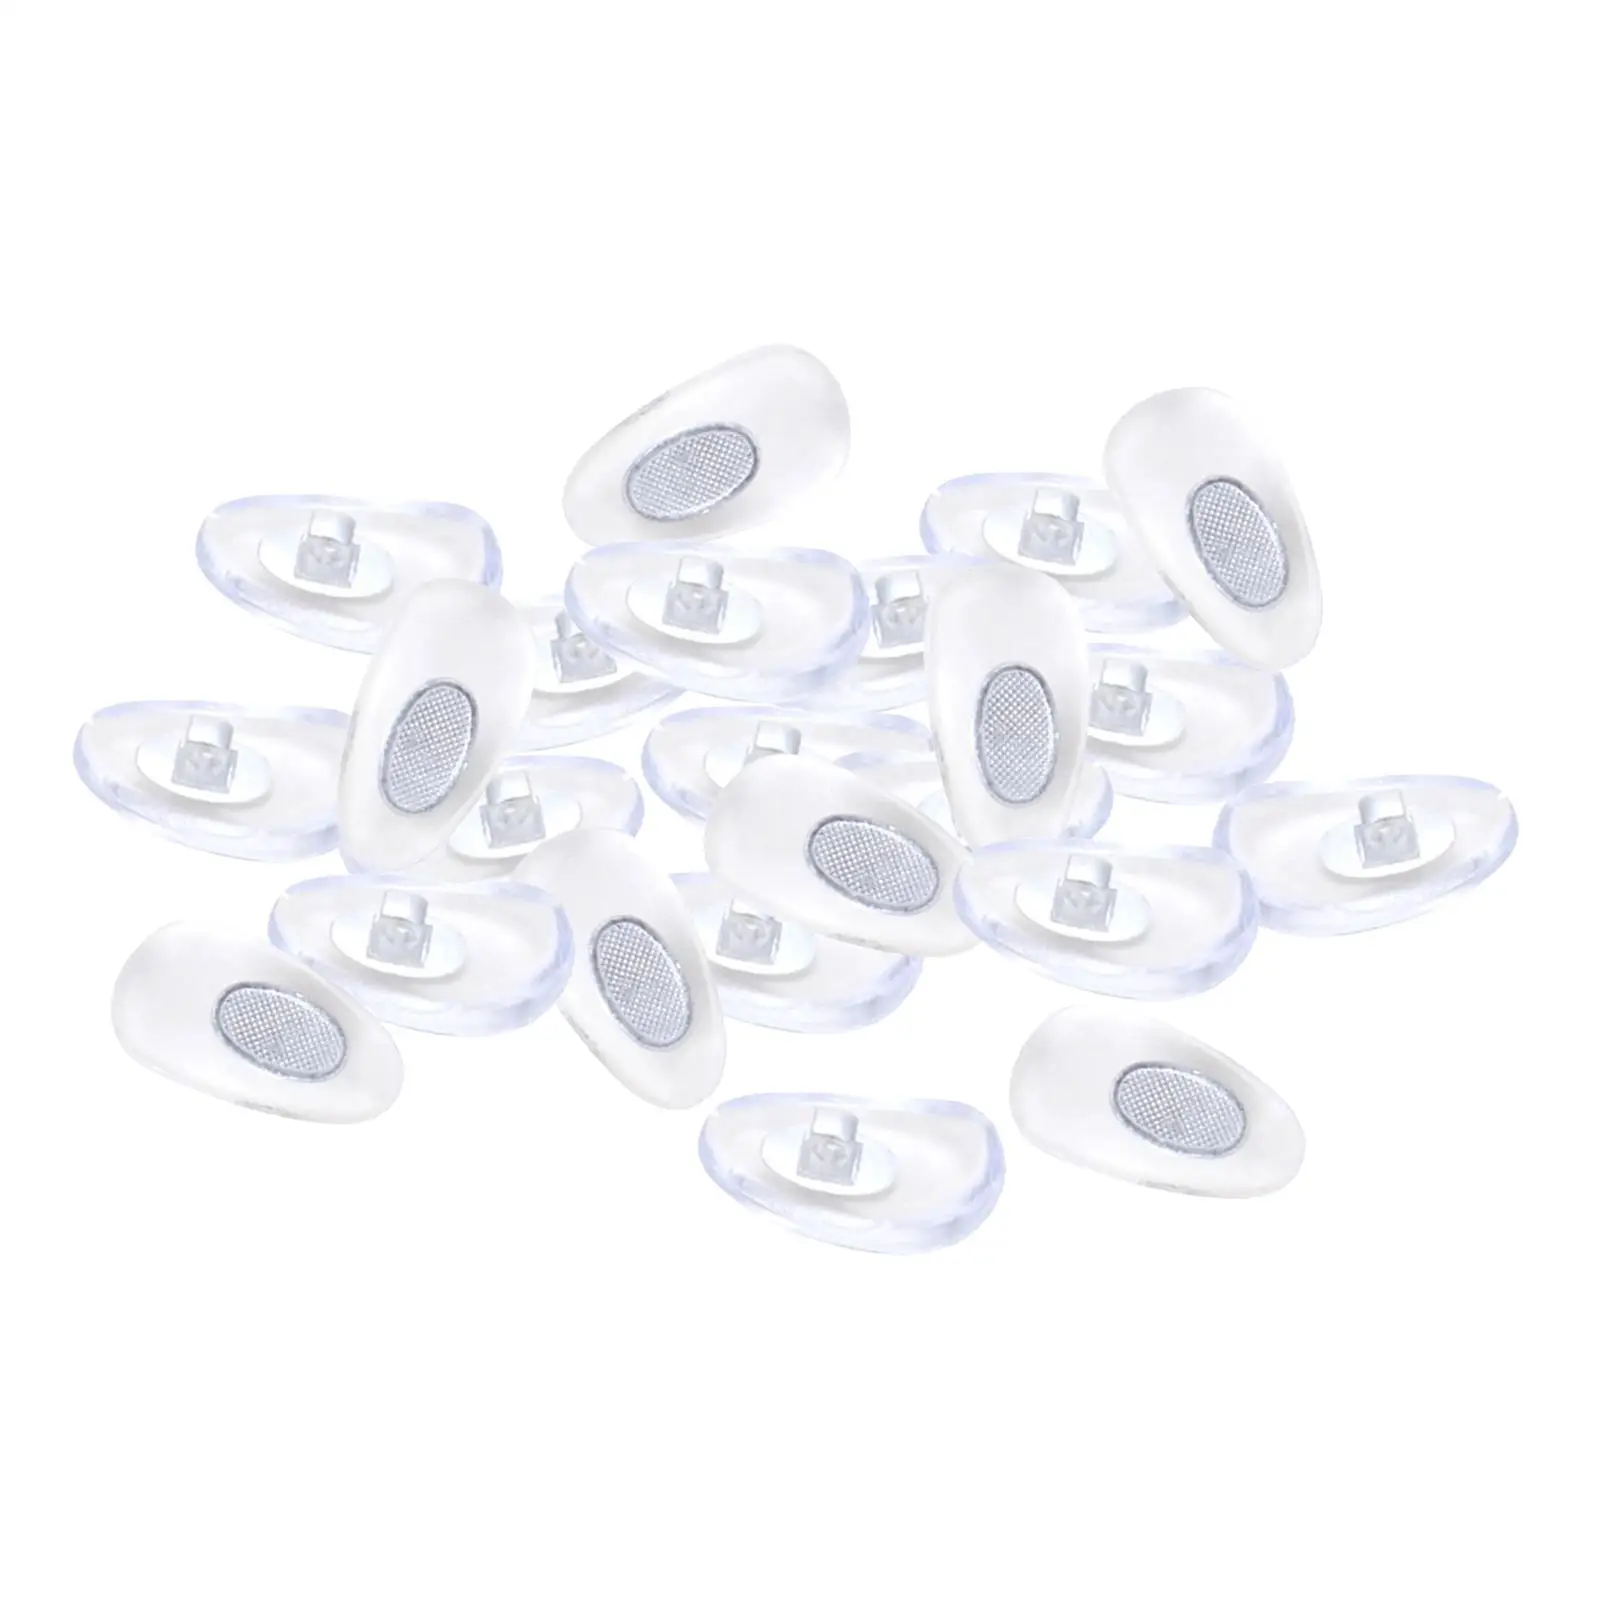 100x Glasses Nose Pads with Metal Core Transparent Comfortable for Eyewear